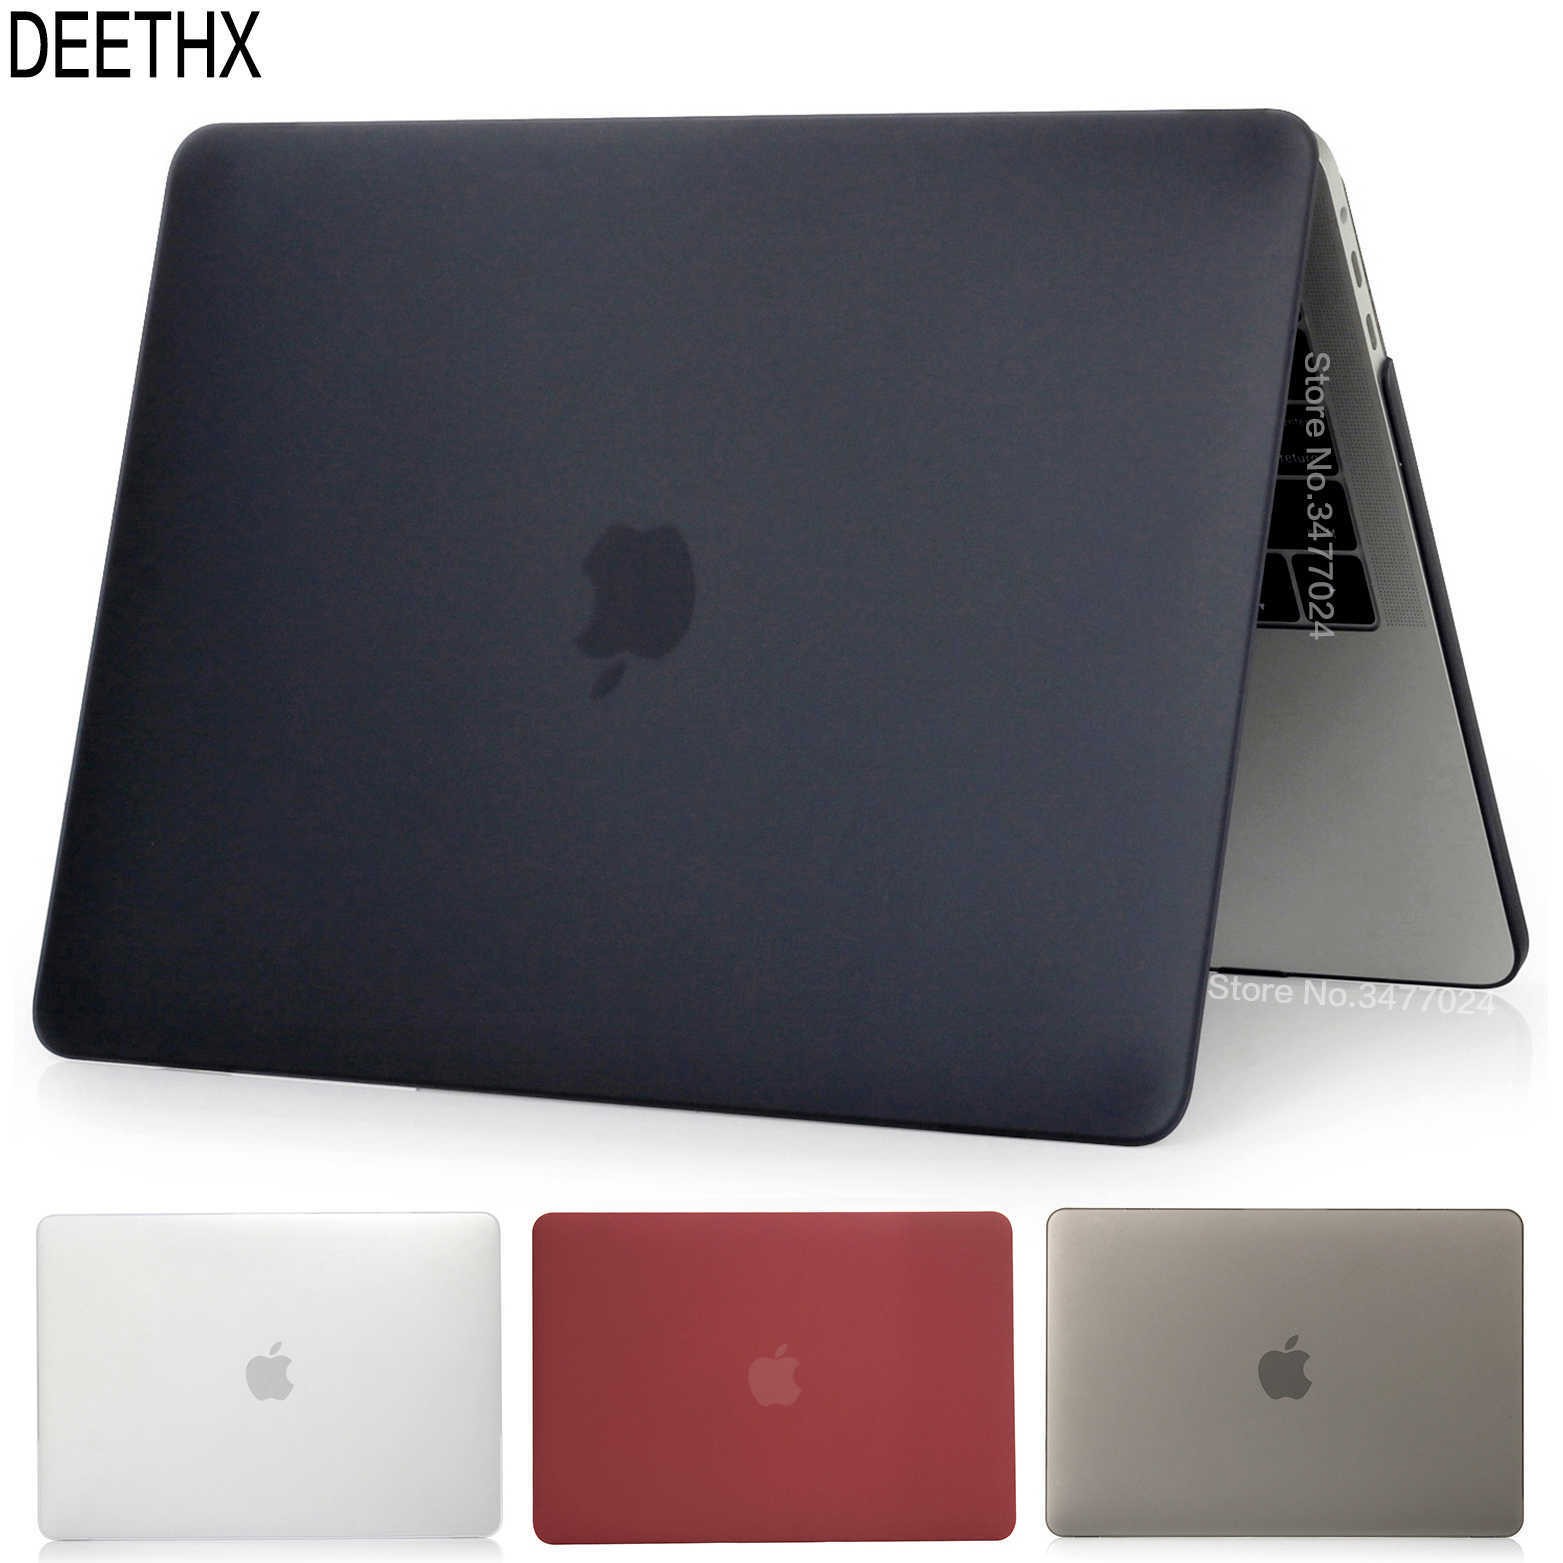 

Matte/crystal,Laptop Case For Macbook Pro Retina Air 11 12 13 15, for mac Air 13 A1466 A1932, pro 13.3 15 16 shell cover 211018